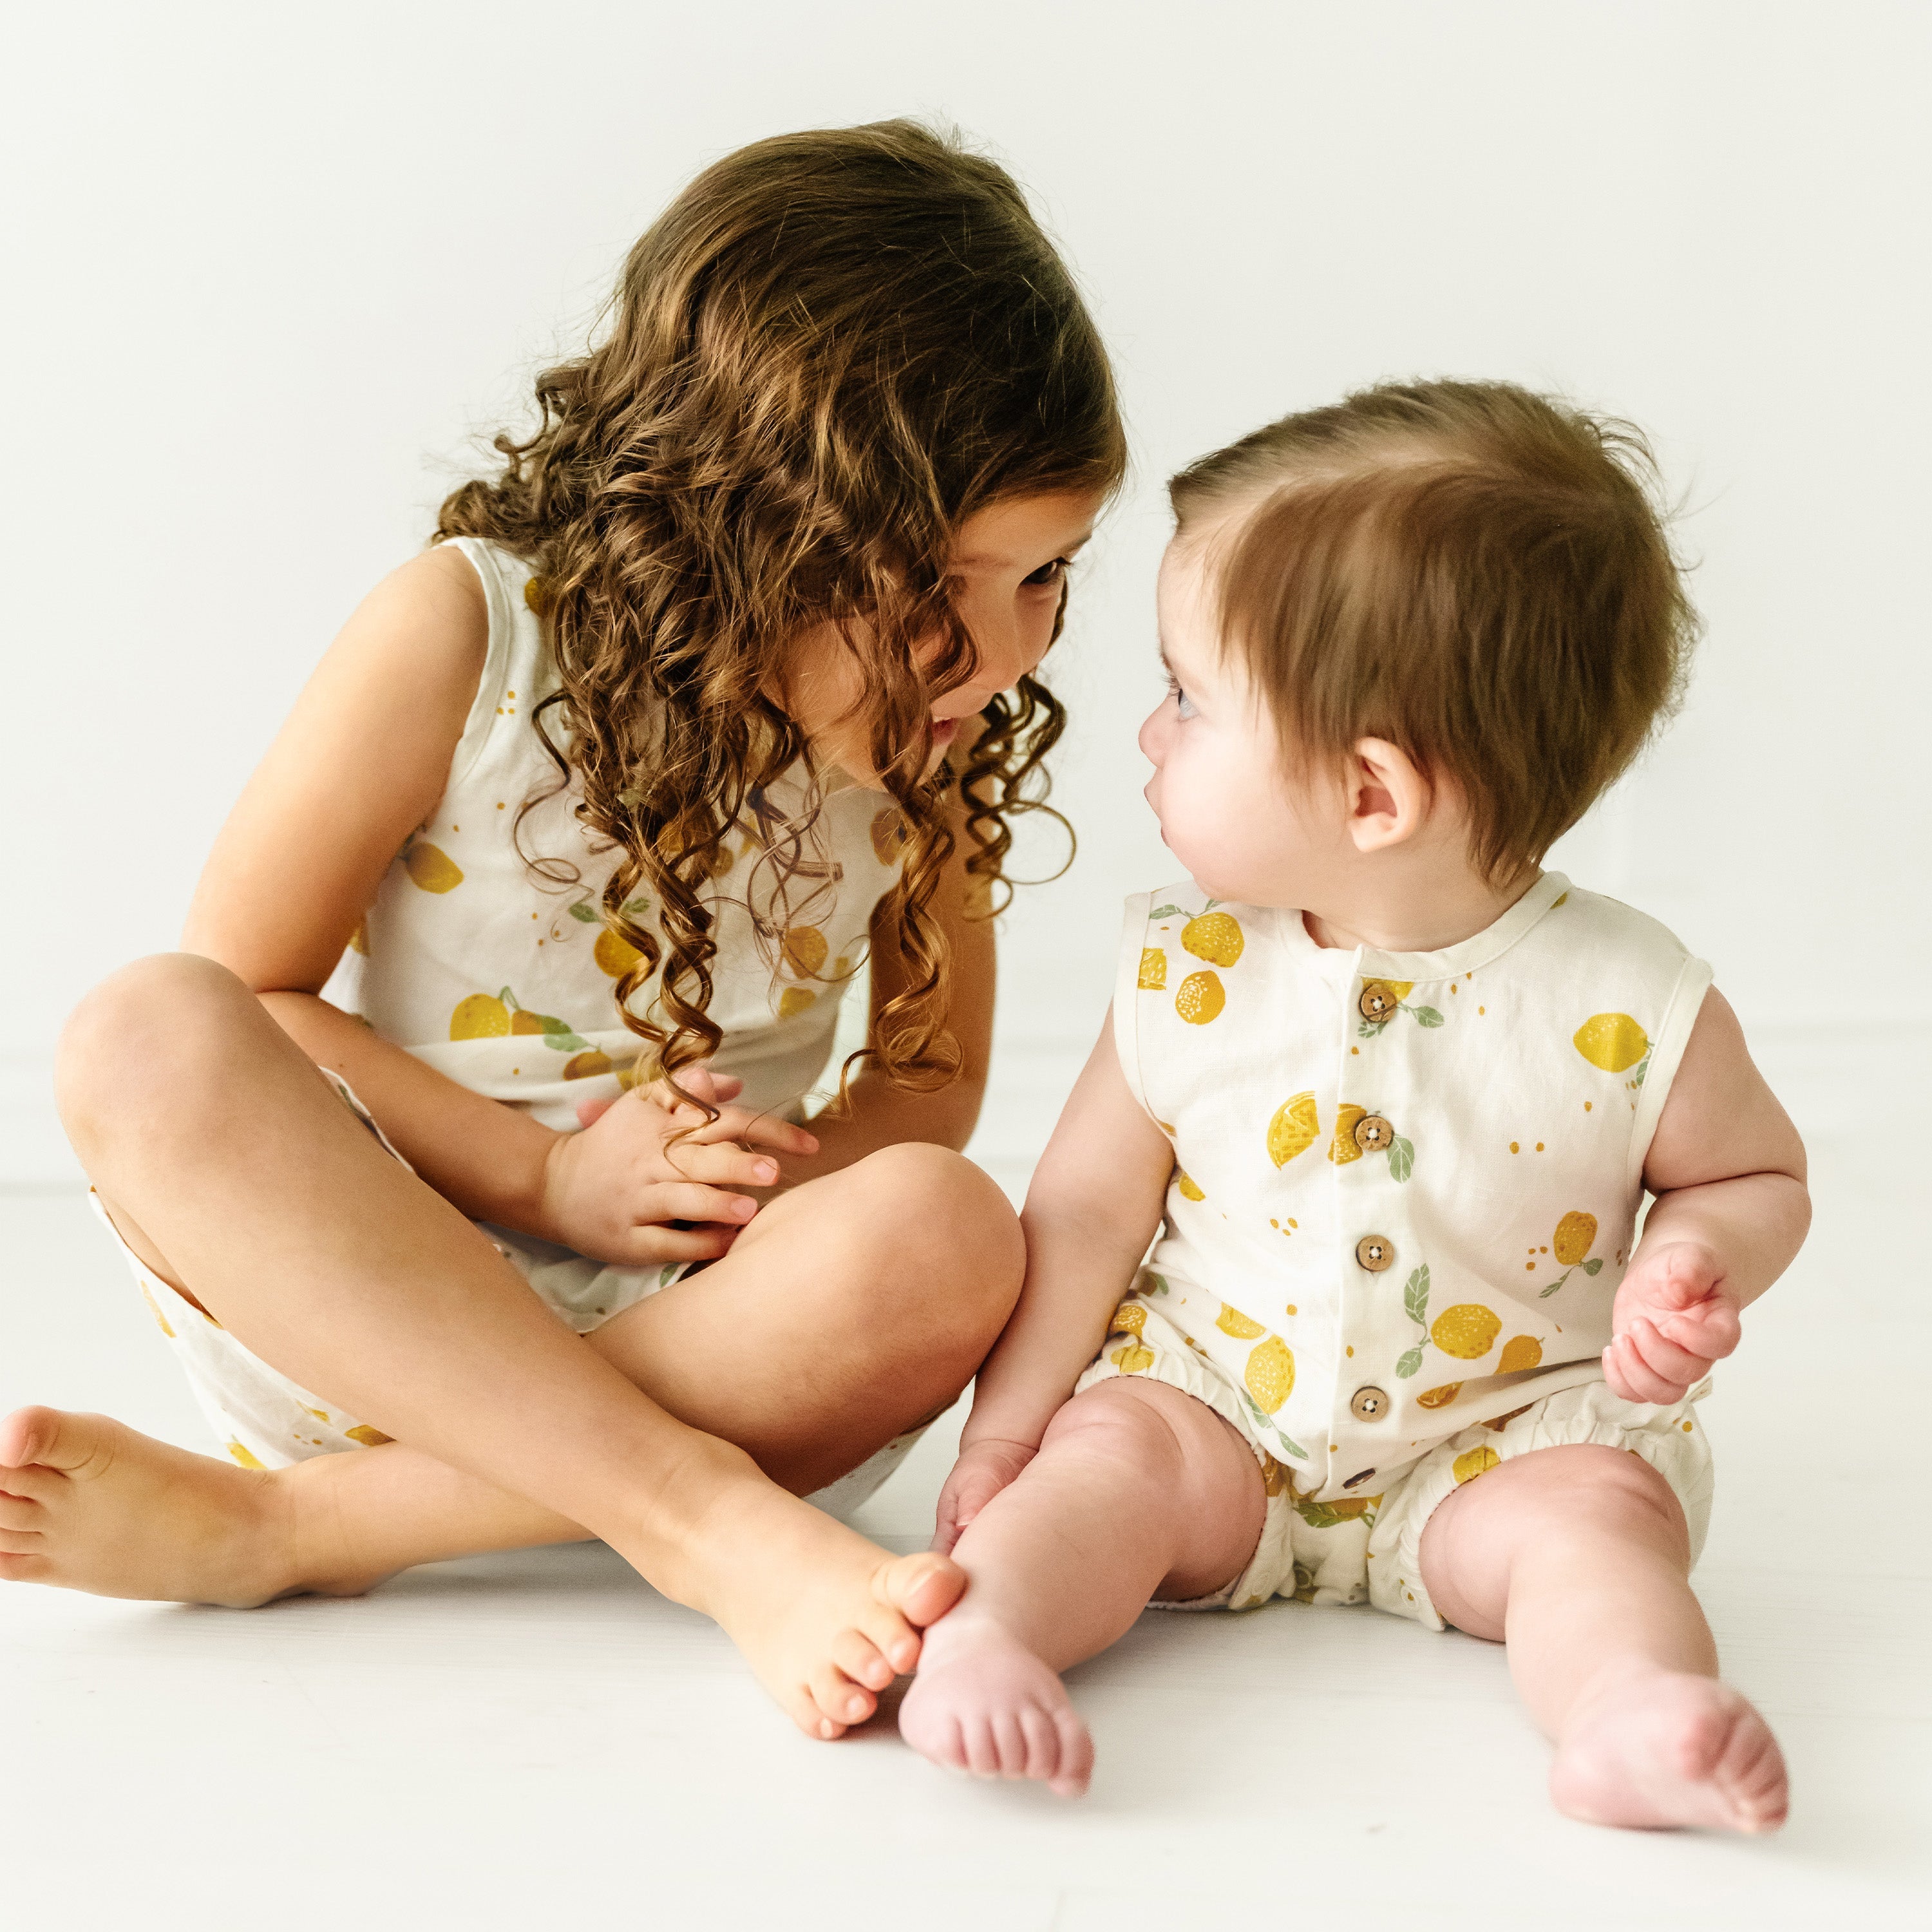 A young girl with curly hair sits cross-legged looking at a baby boy in a Citron Organic Linen Sleeveless Bubble Romper from Makemake Organics, who gazes back, both on a white background.